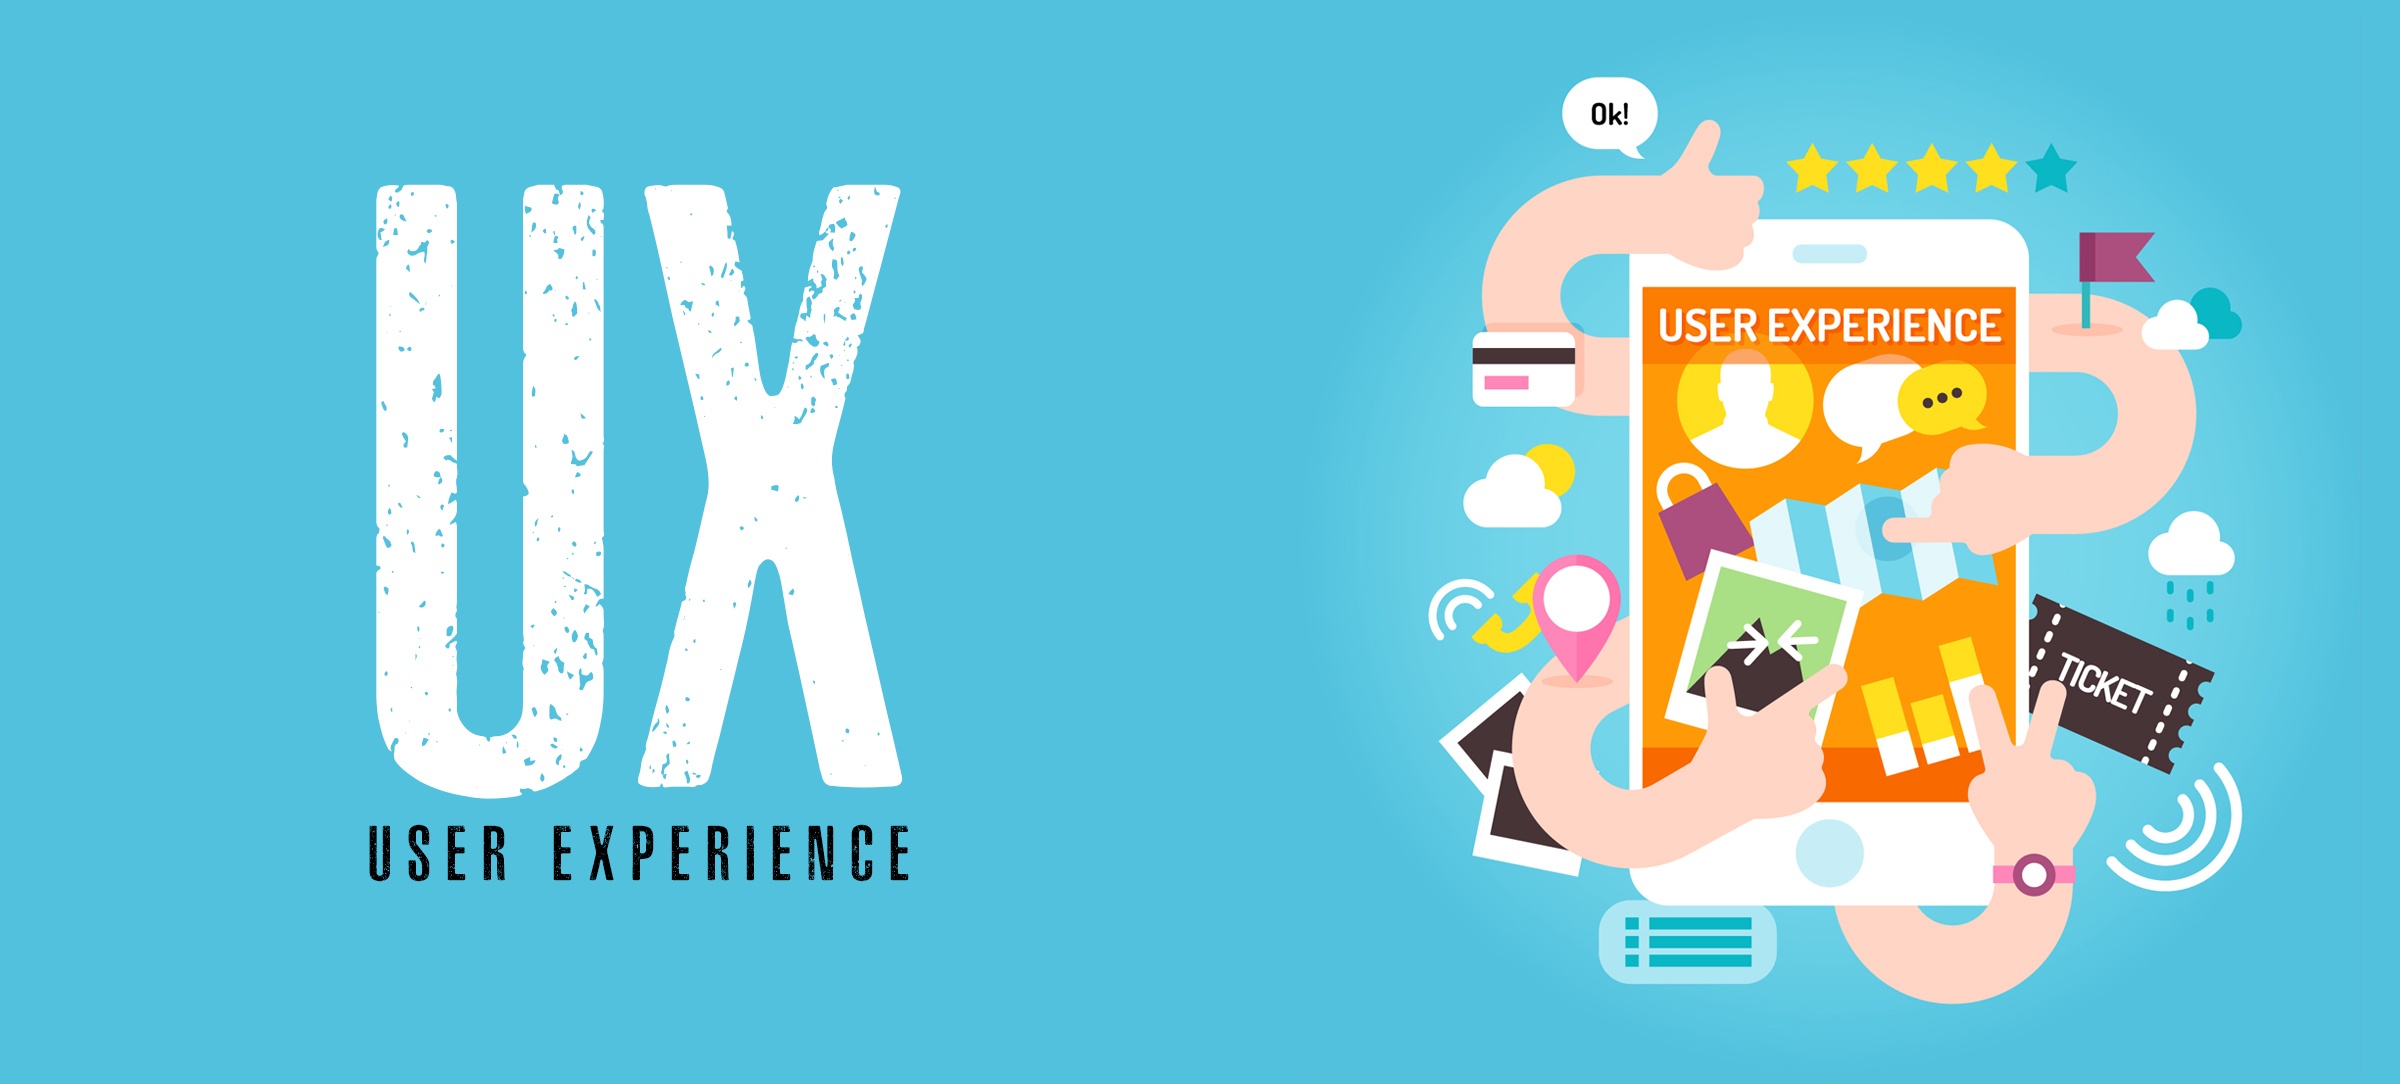 5 factors that impact user experience